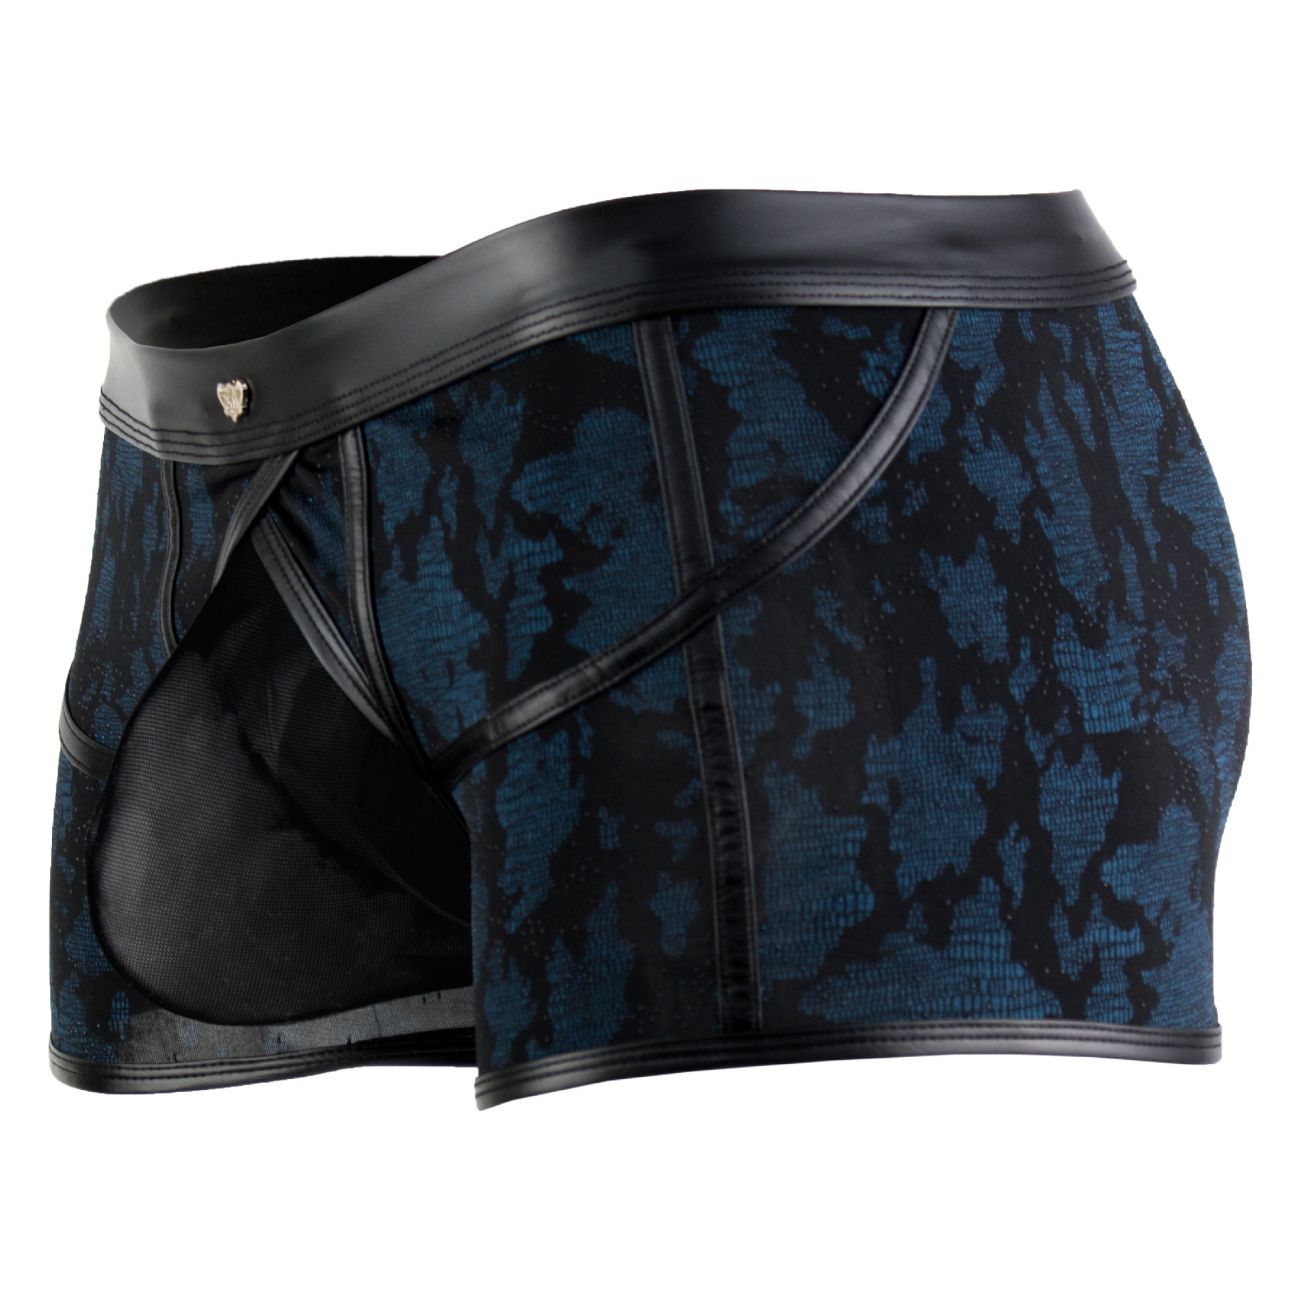 Male Power 134238 Strapped and Bound Strappy Short Boxer Briefs